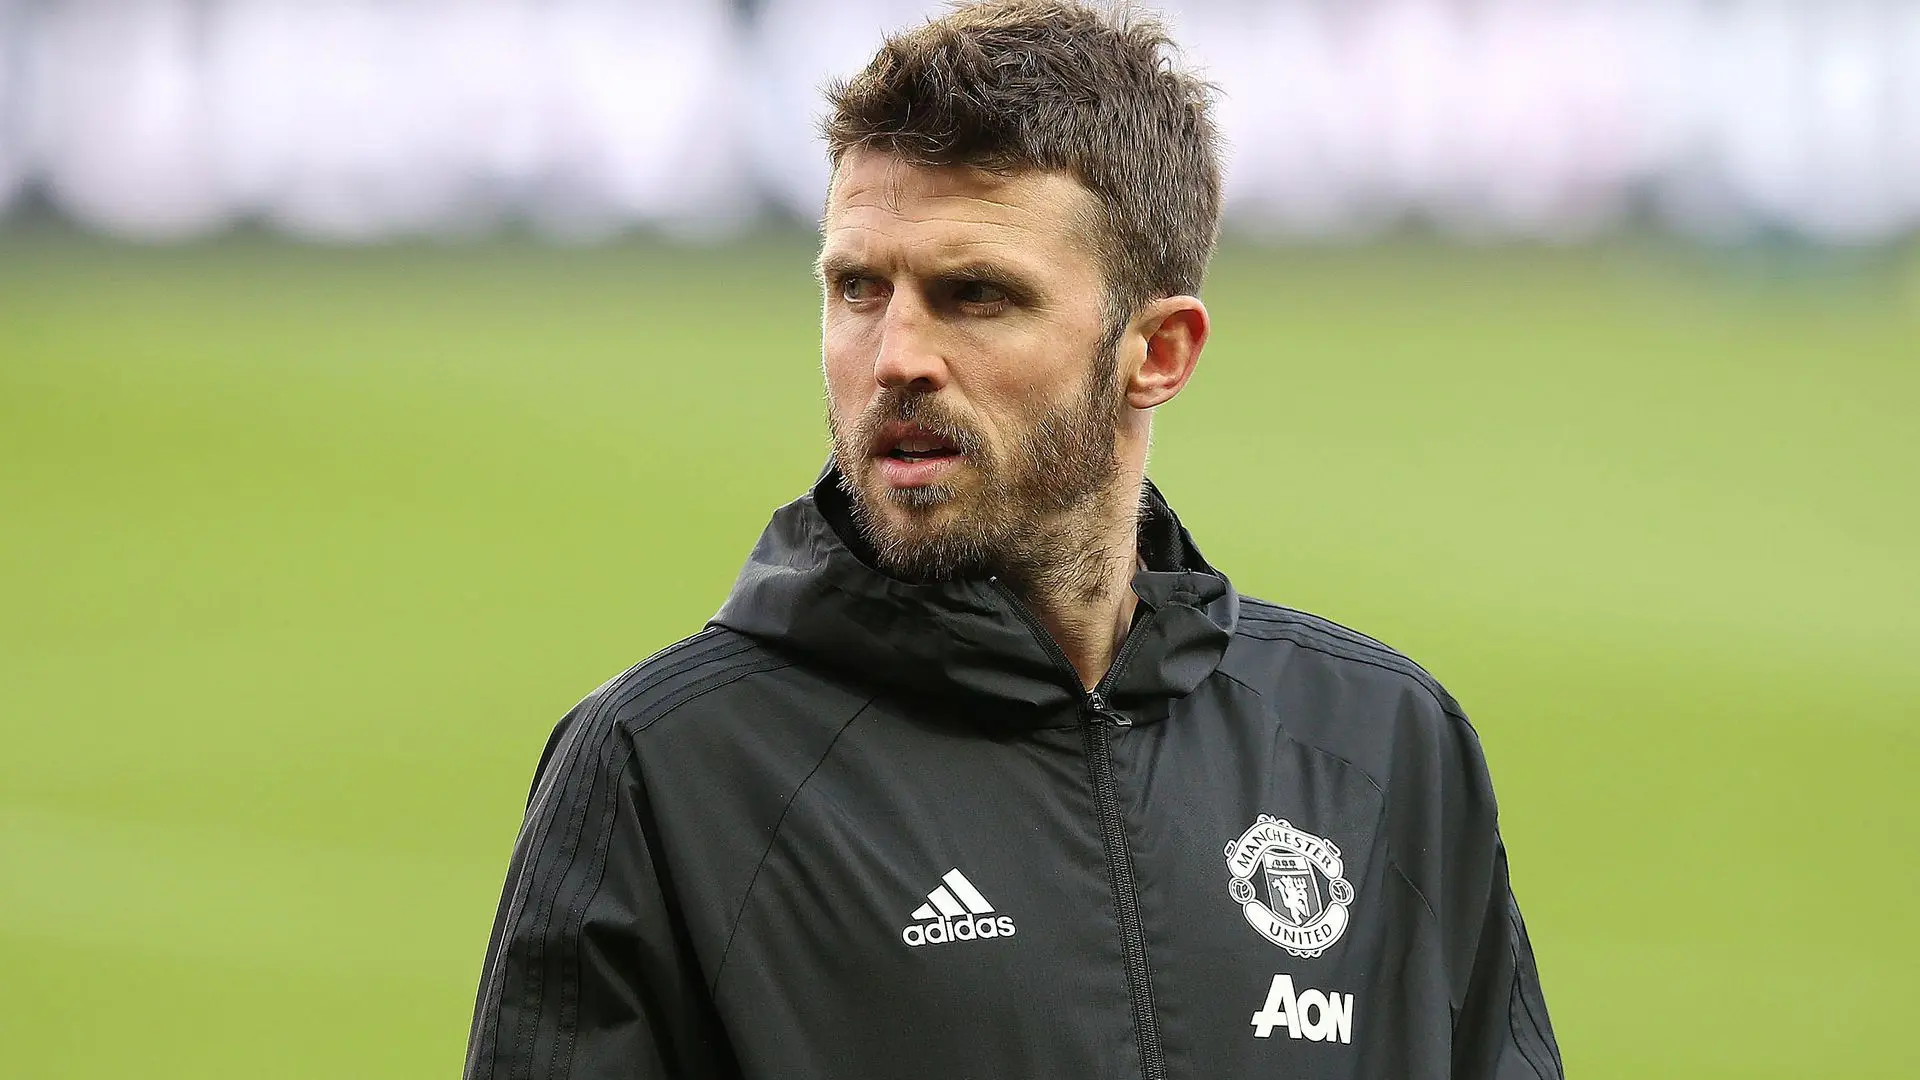 Carrick set to be named new Middlesbrough manager (reliability: 4 stars)